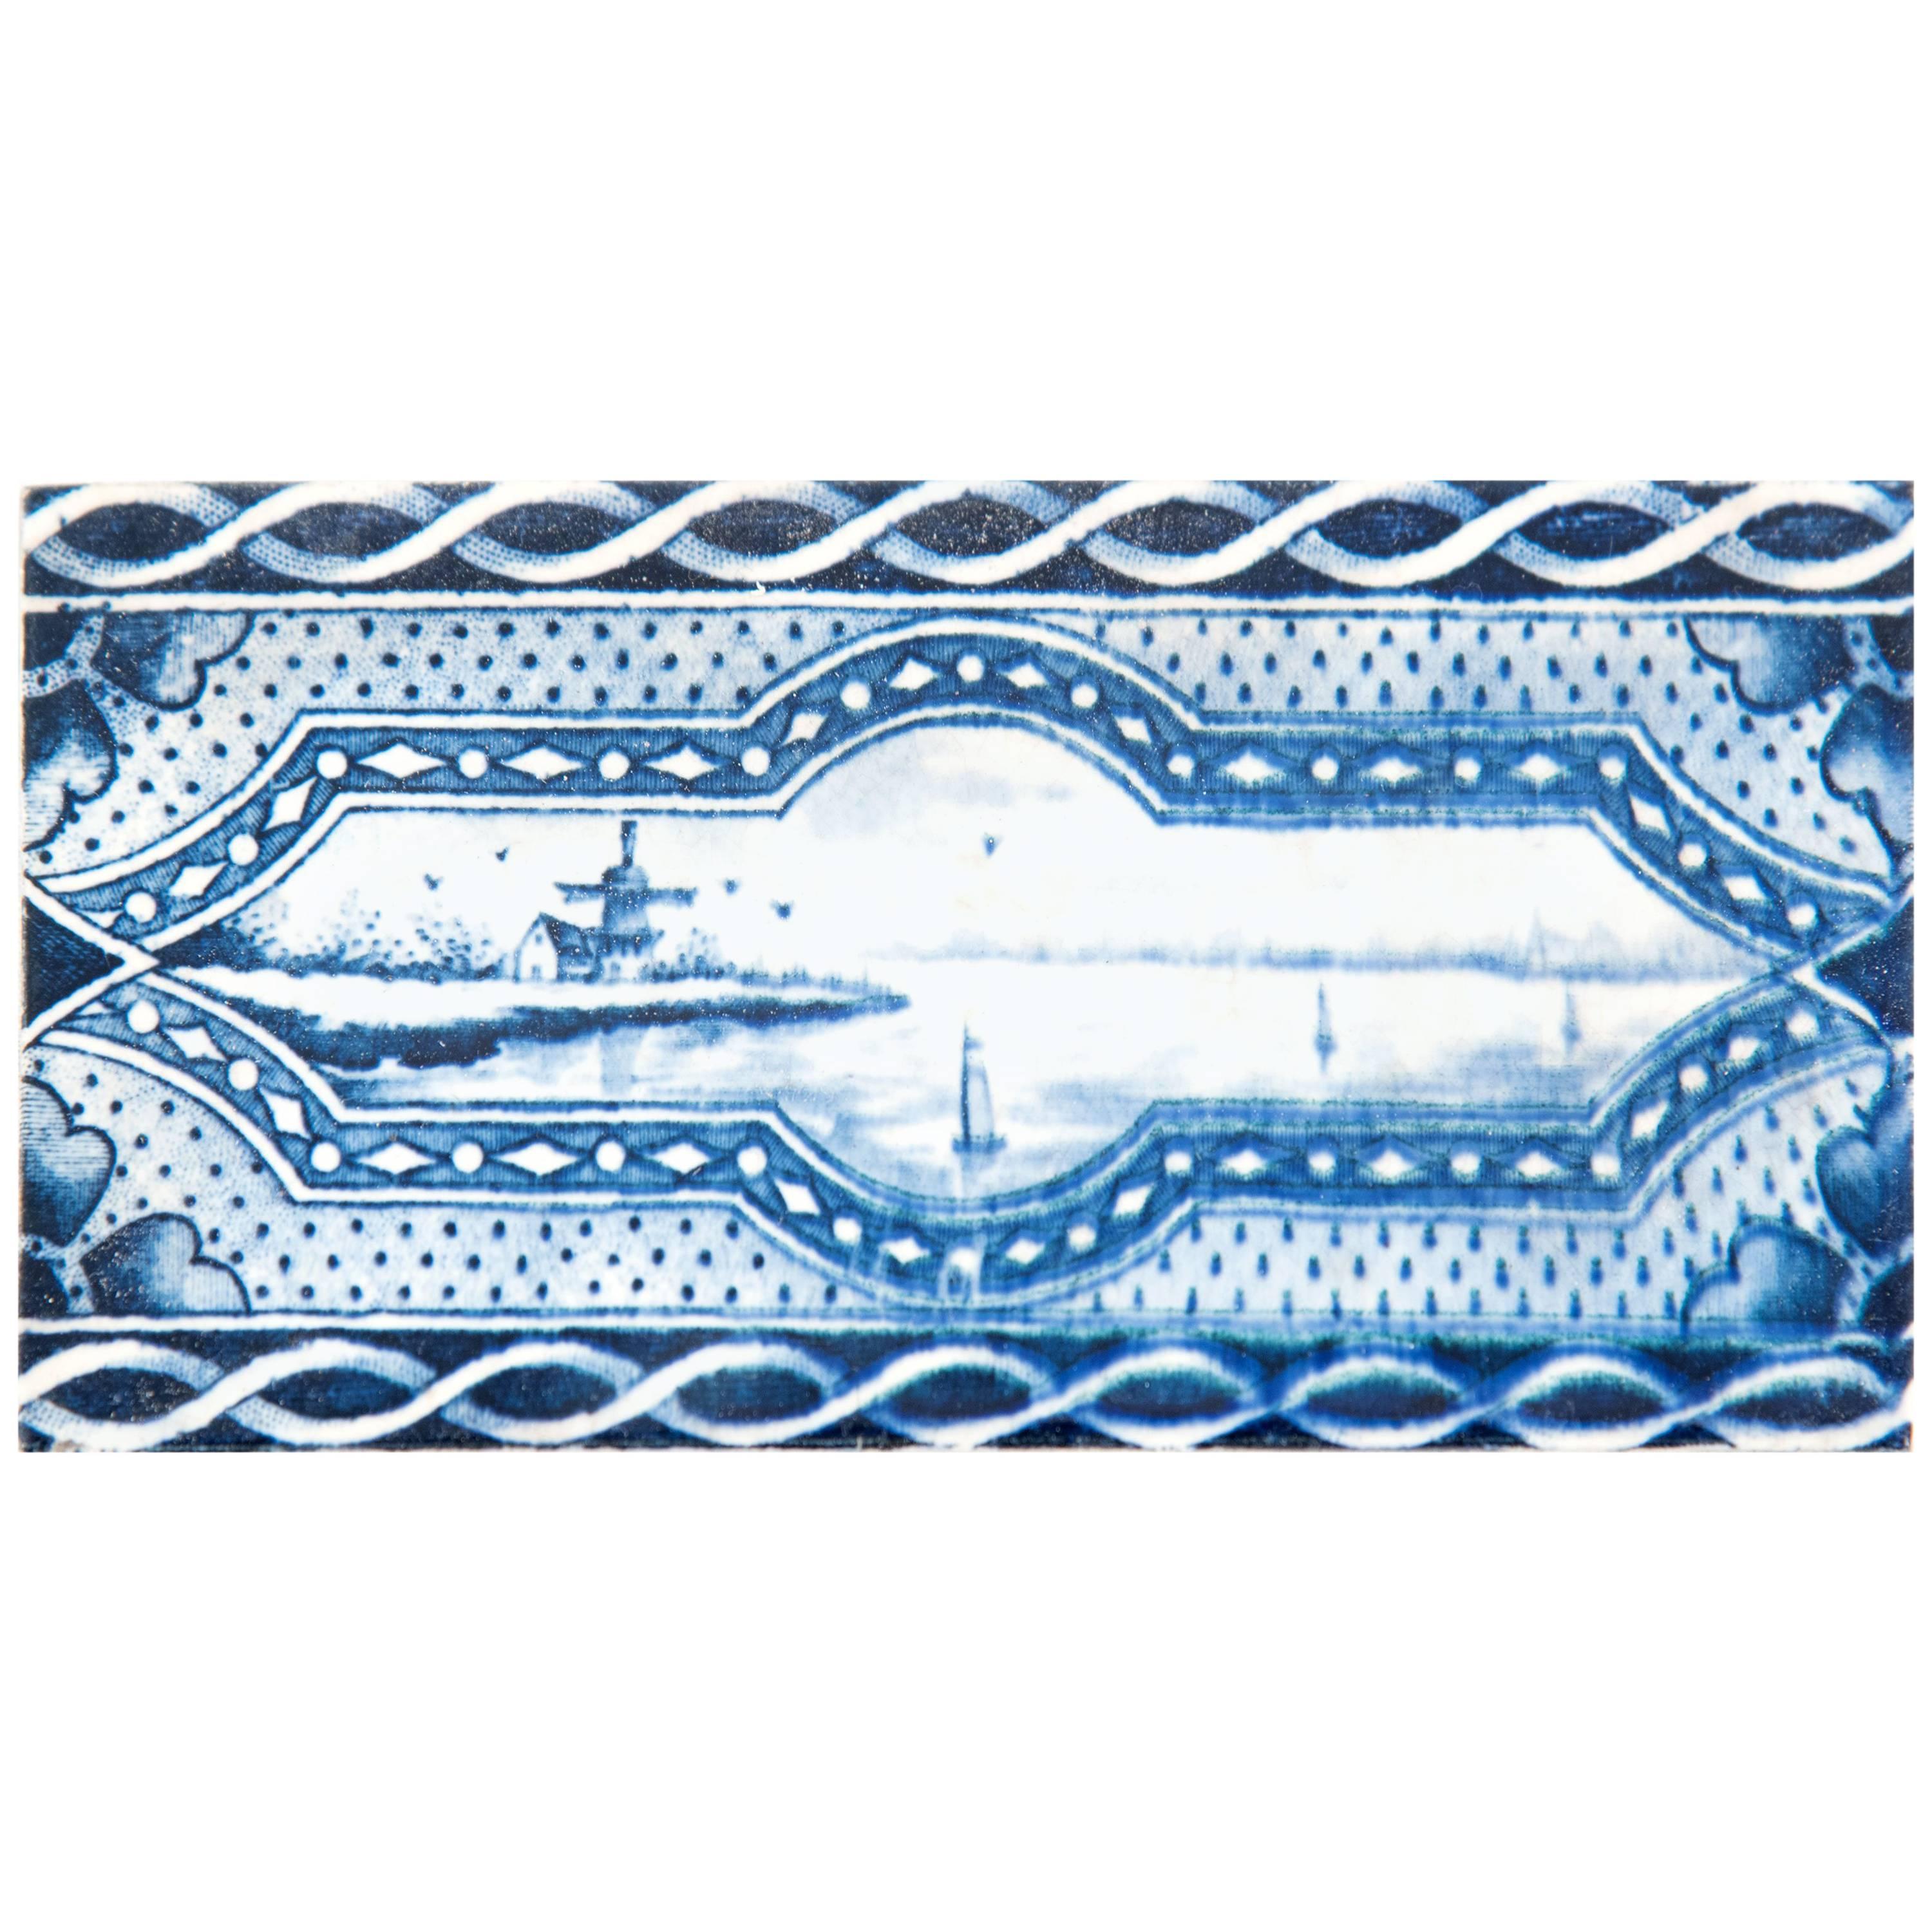 19th Century Delft Blue and White Border Tile with Windmill and Ships